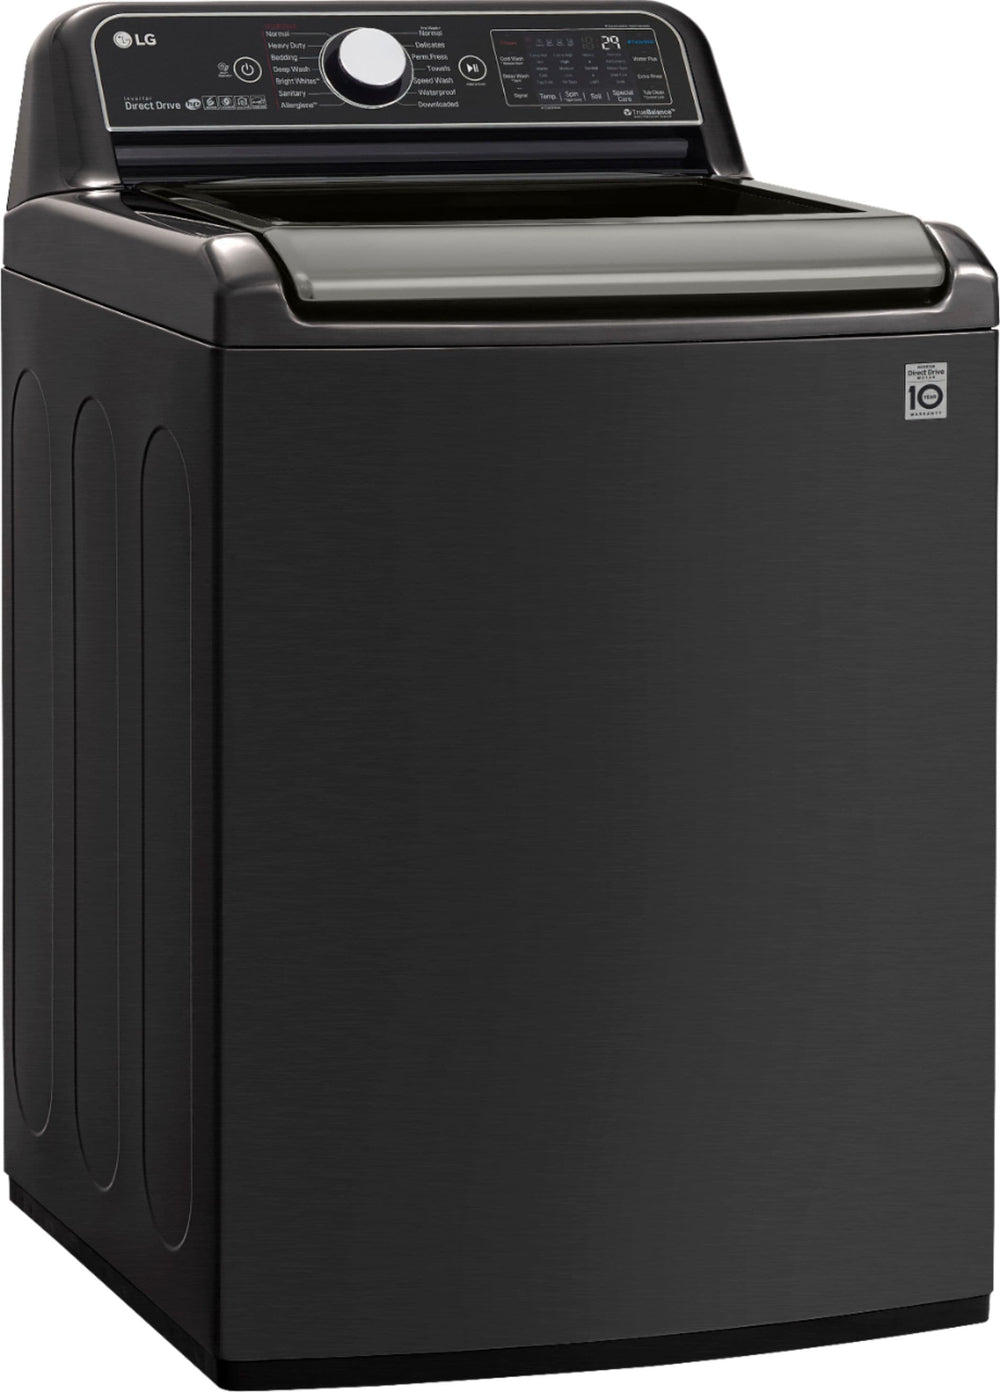 LG - 5.5 Cu. Ft. High-Efficiency Smart Top Load Washer with Steam and TurboWash3D Technology - Black steel_1